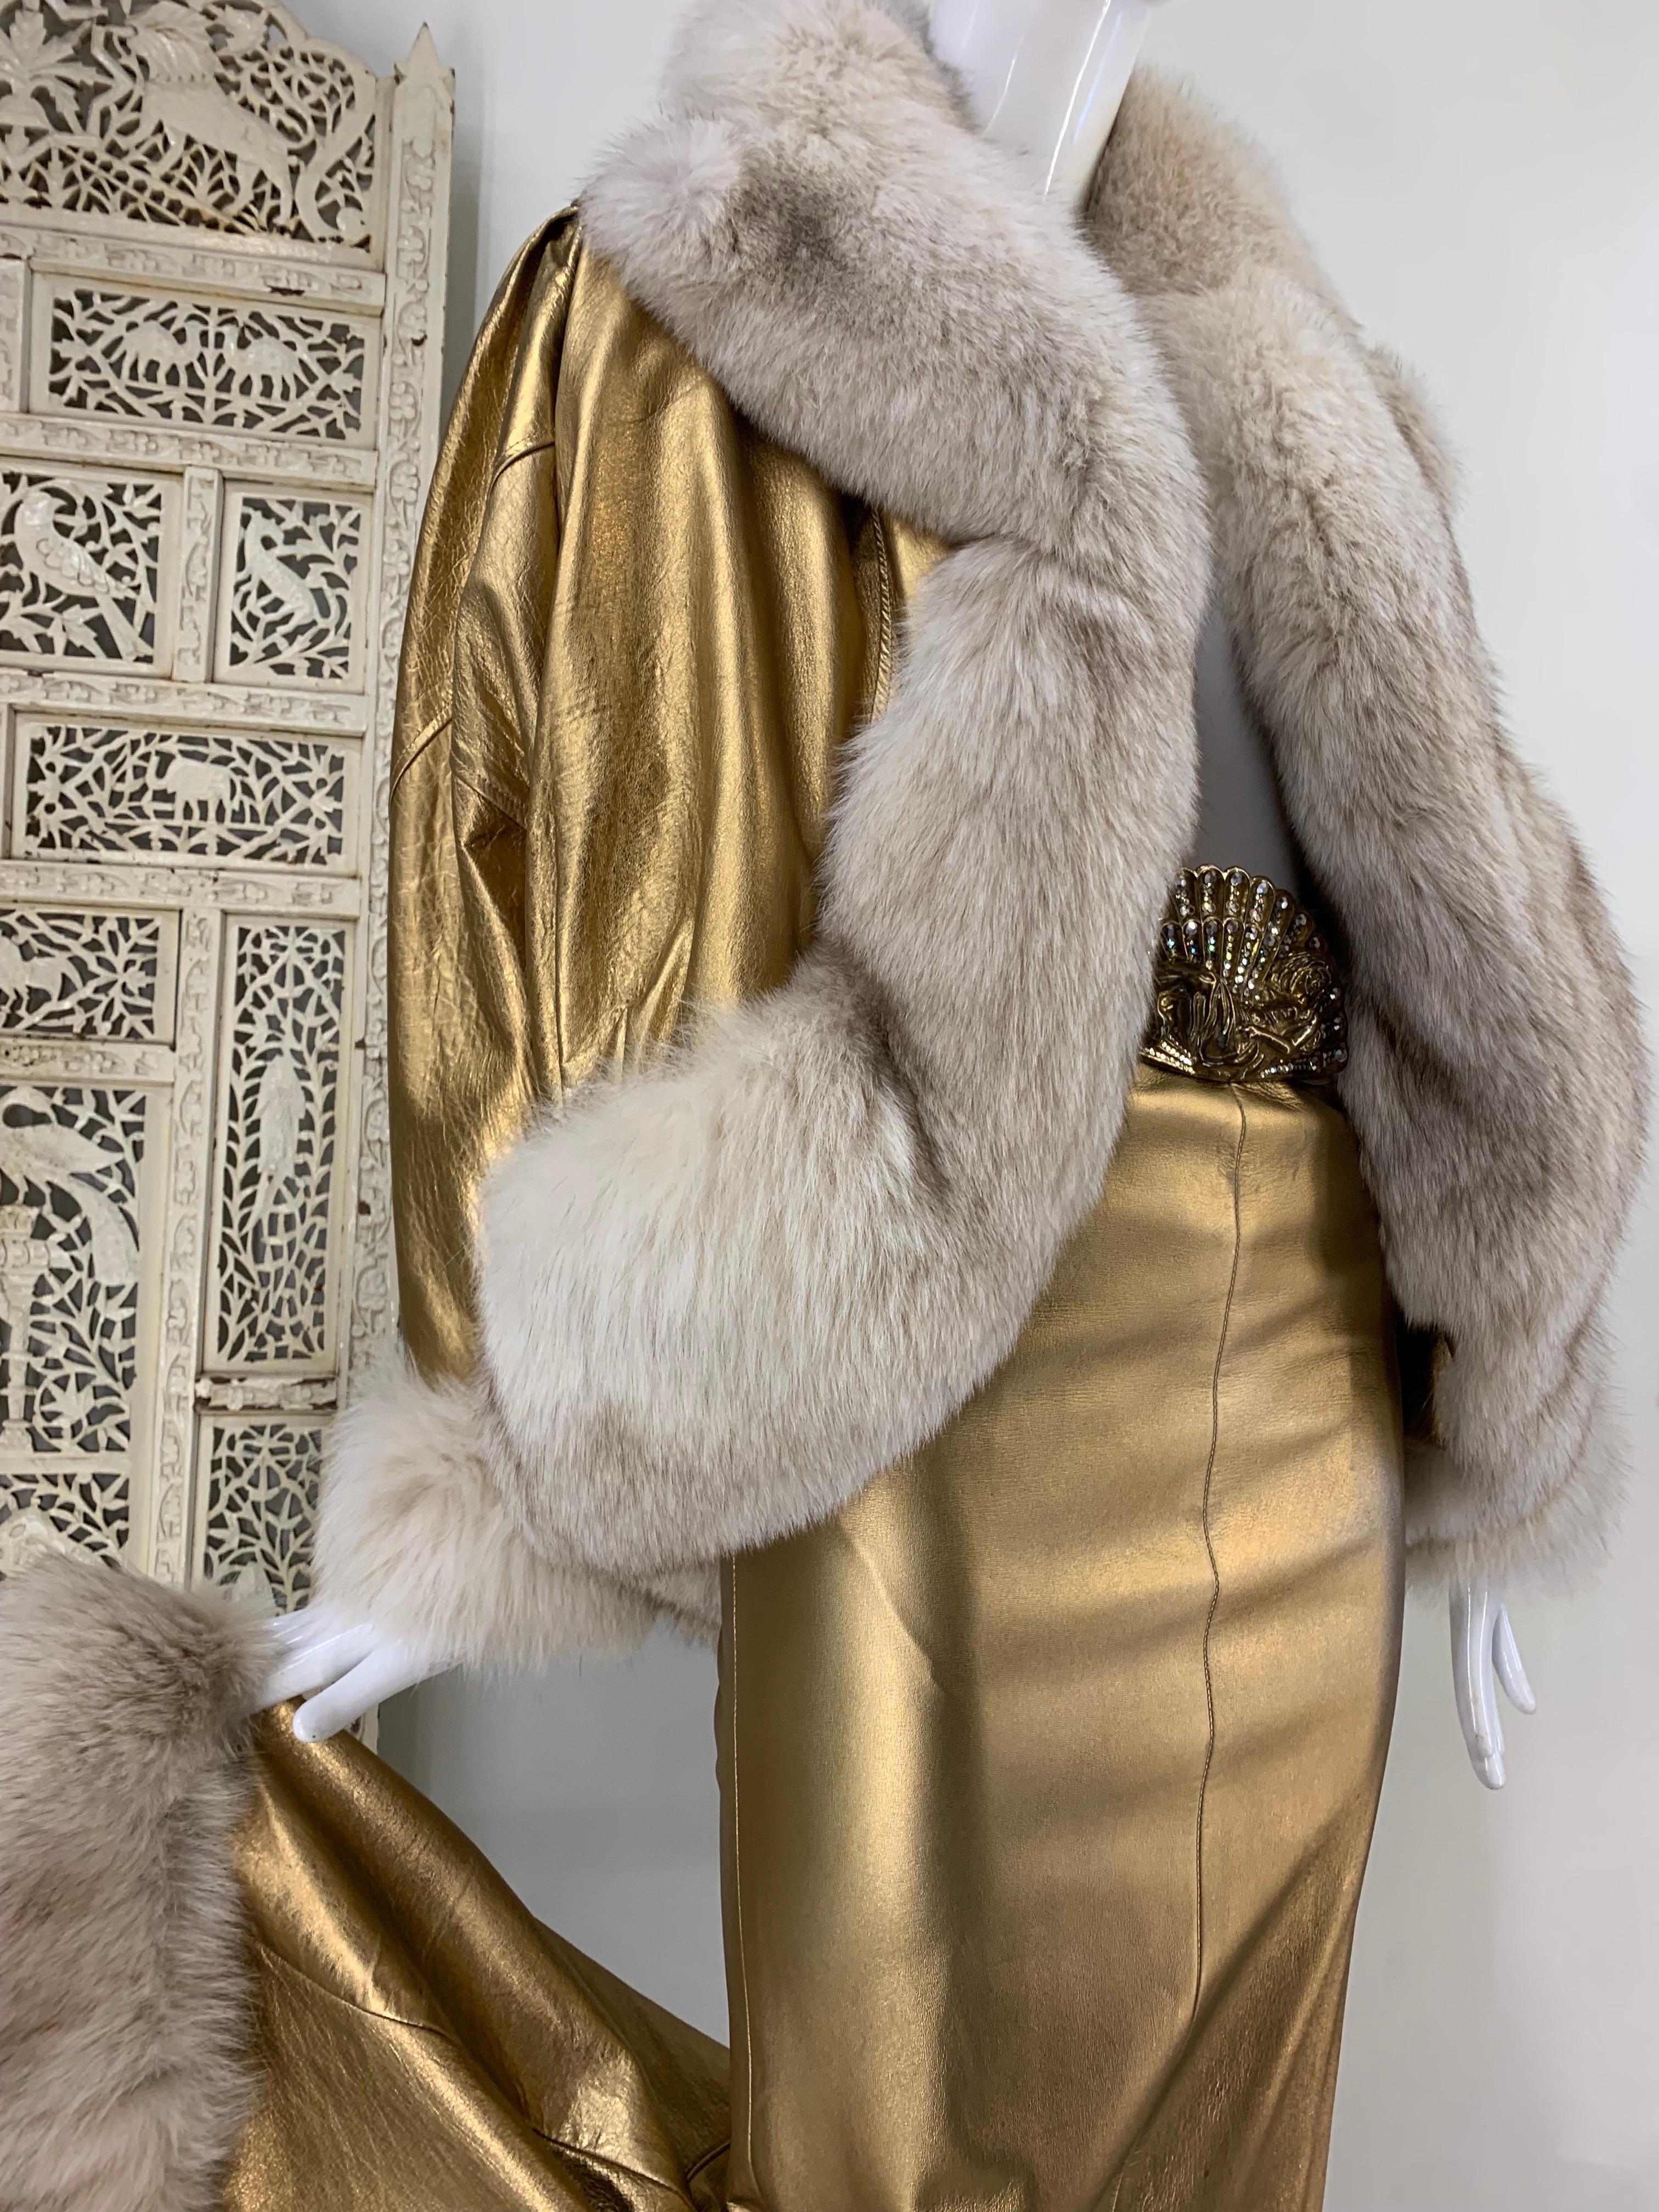 1980s Jitrois Matte Gold Leather Fishtail Skirt & Cocoon Coat Edged in Lush Fox: Jean-Claude Jitrois holiday fantasy ensemble with coordinating belt with large fan-shaped buckle. Dramatic Dolman sleeve cocoon coat will keep you warm for a holiday